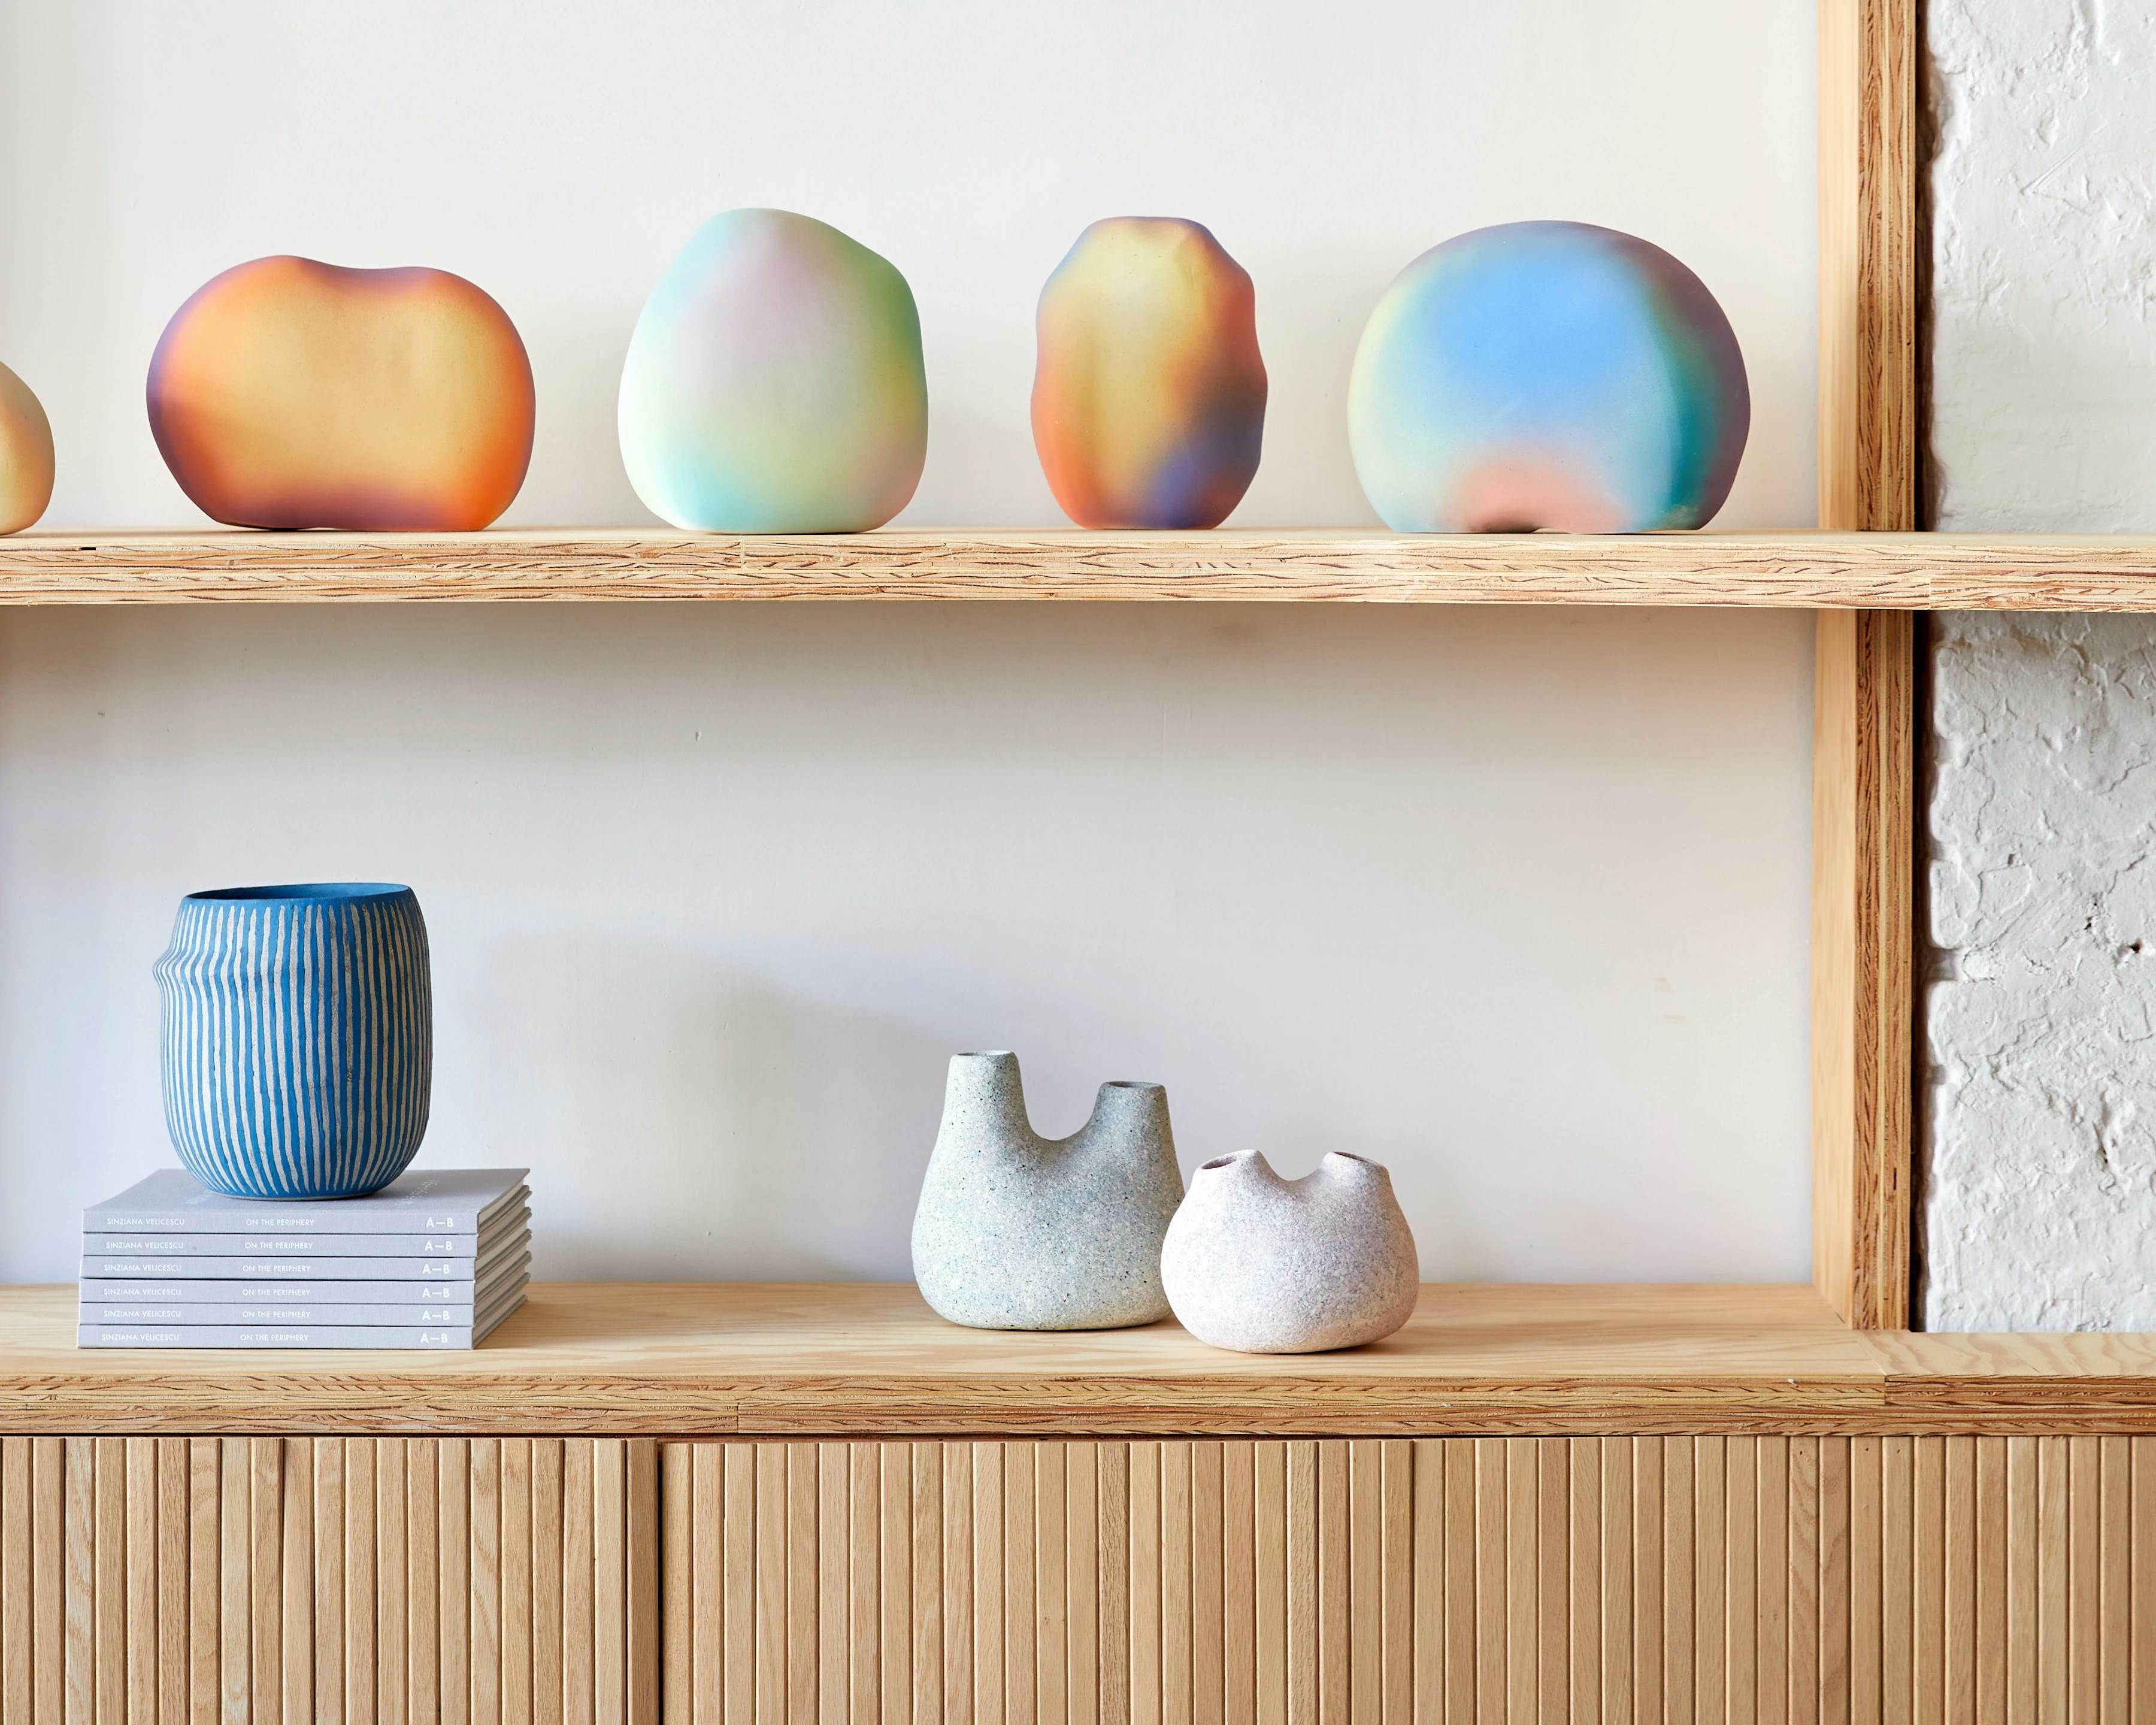 Wooden shelves with four prismatic sculptures by artist Angel Oloshove above three sculptural vessels by Pilar Wiley on display at Uprise Art.